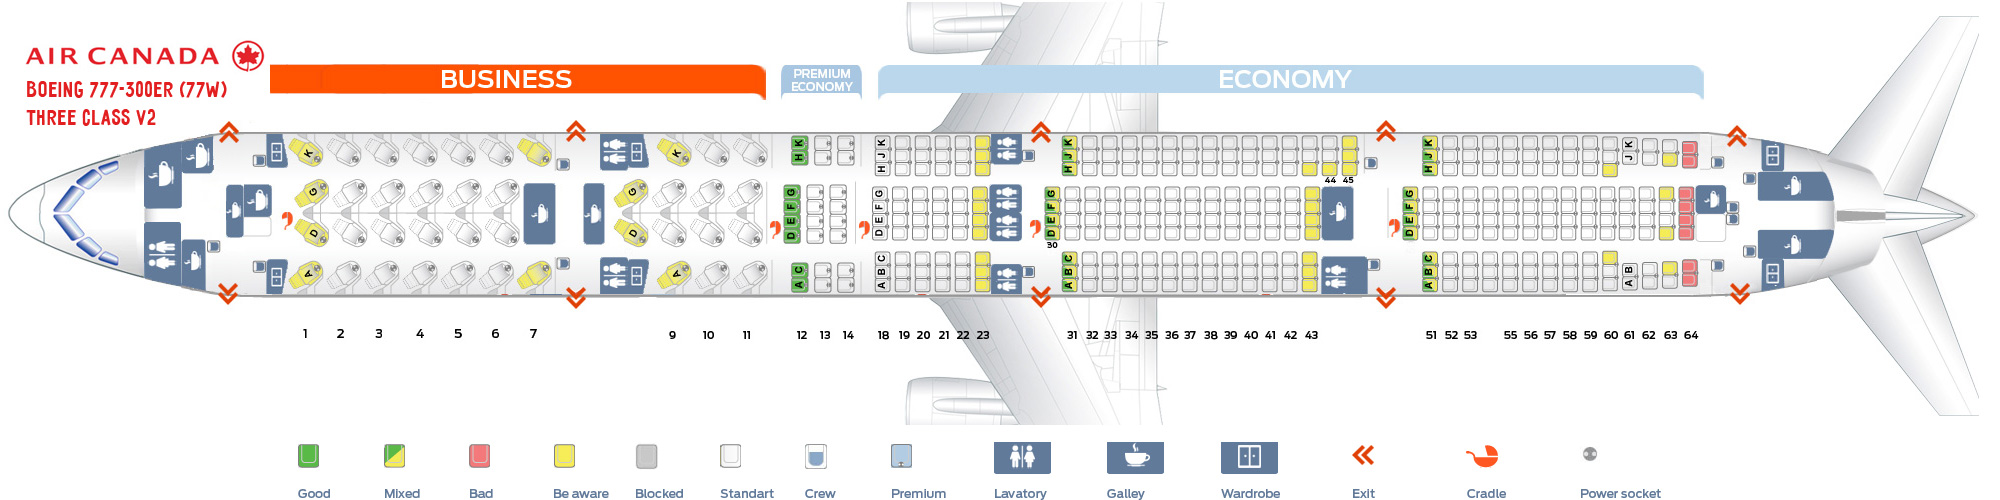 How do you find a seating chart for the Boeing 77W?